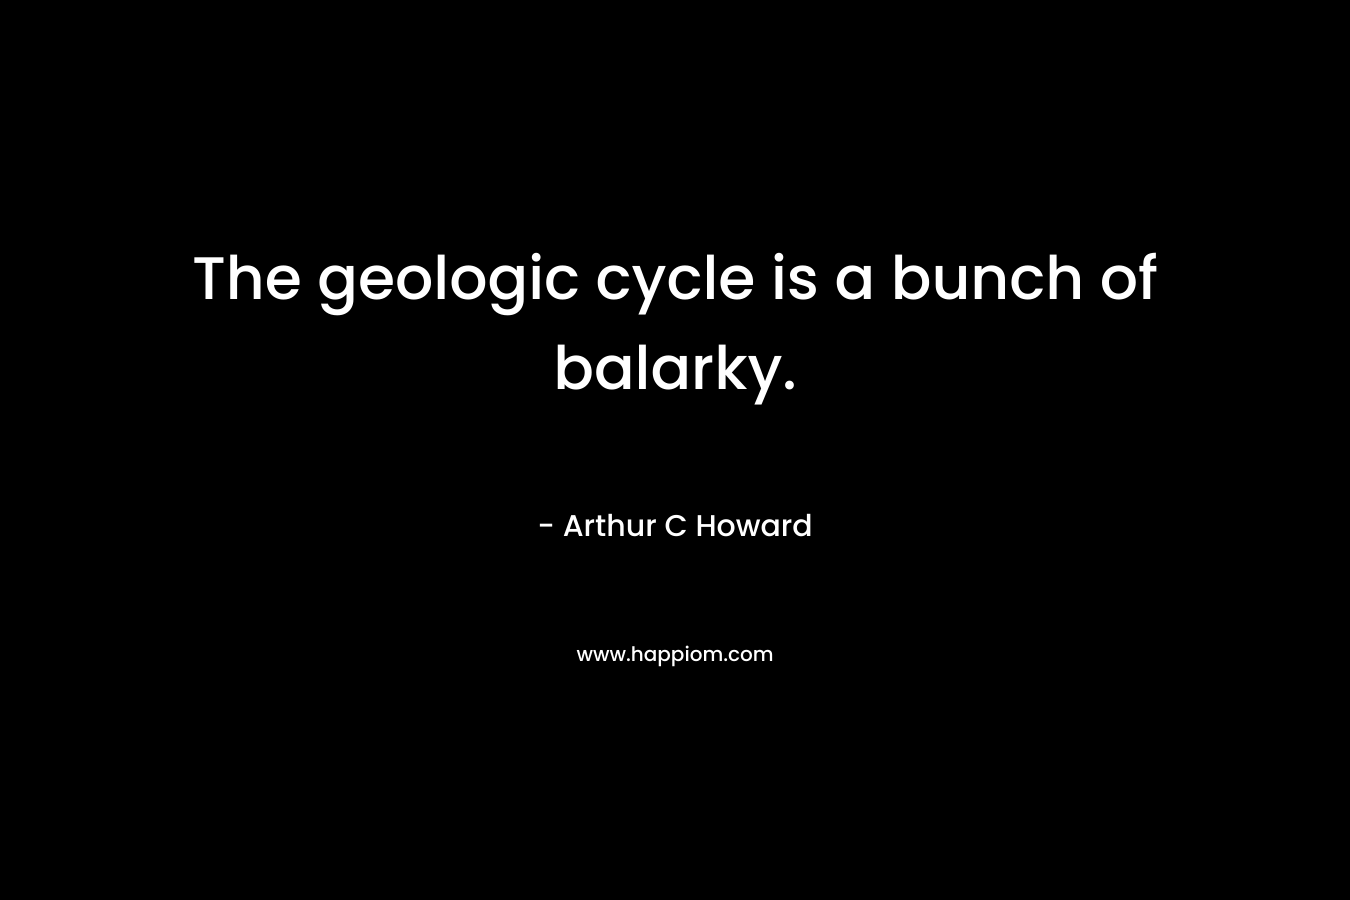 The geologic cycle is a bunch of balarky.